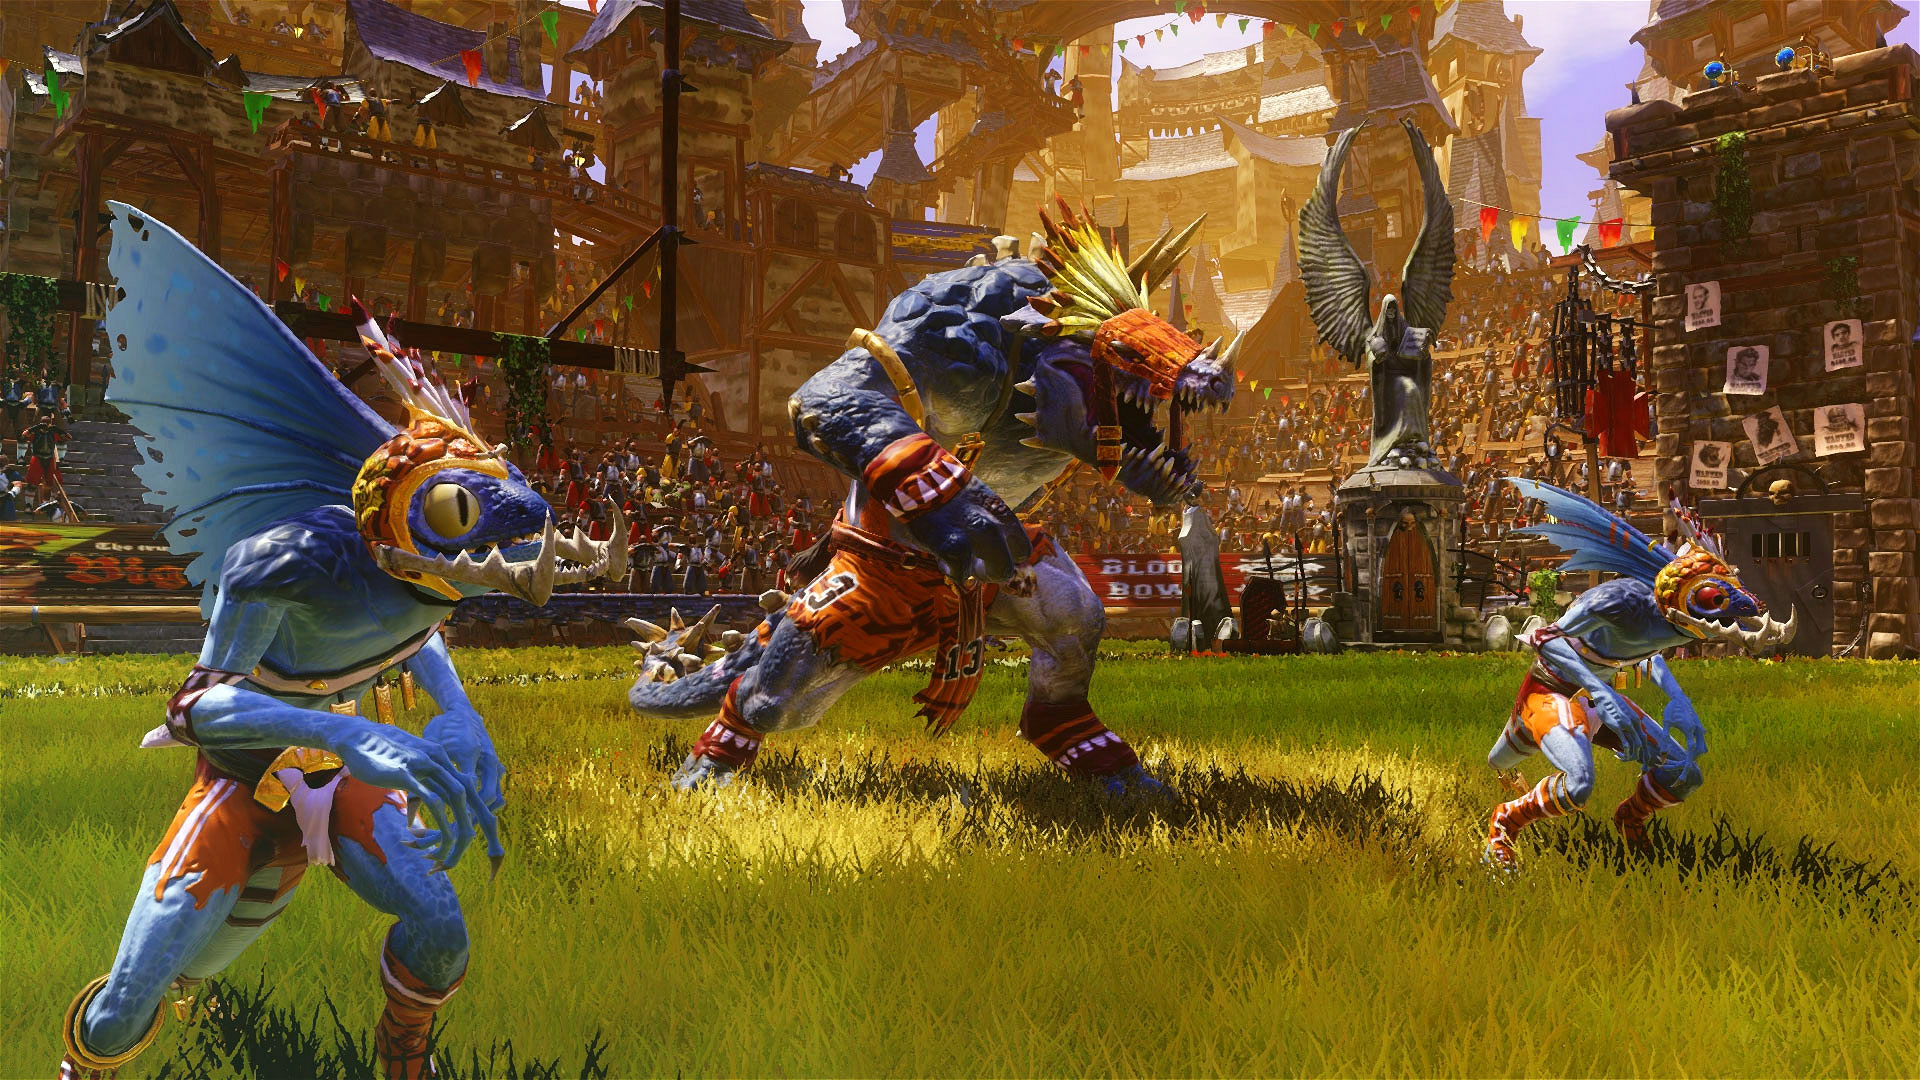 download bloodbowl 3 release